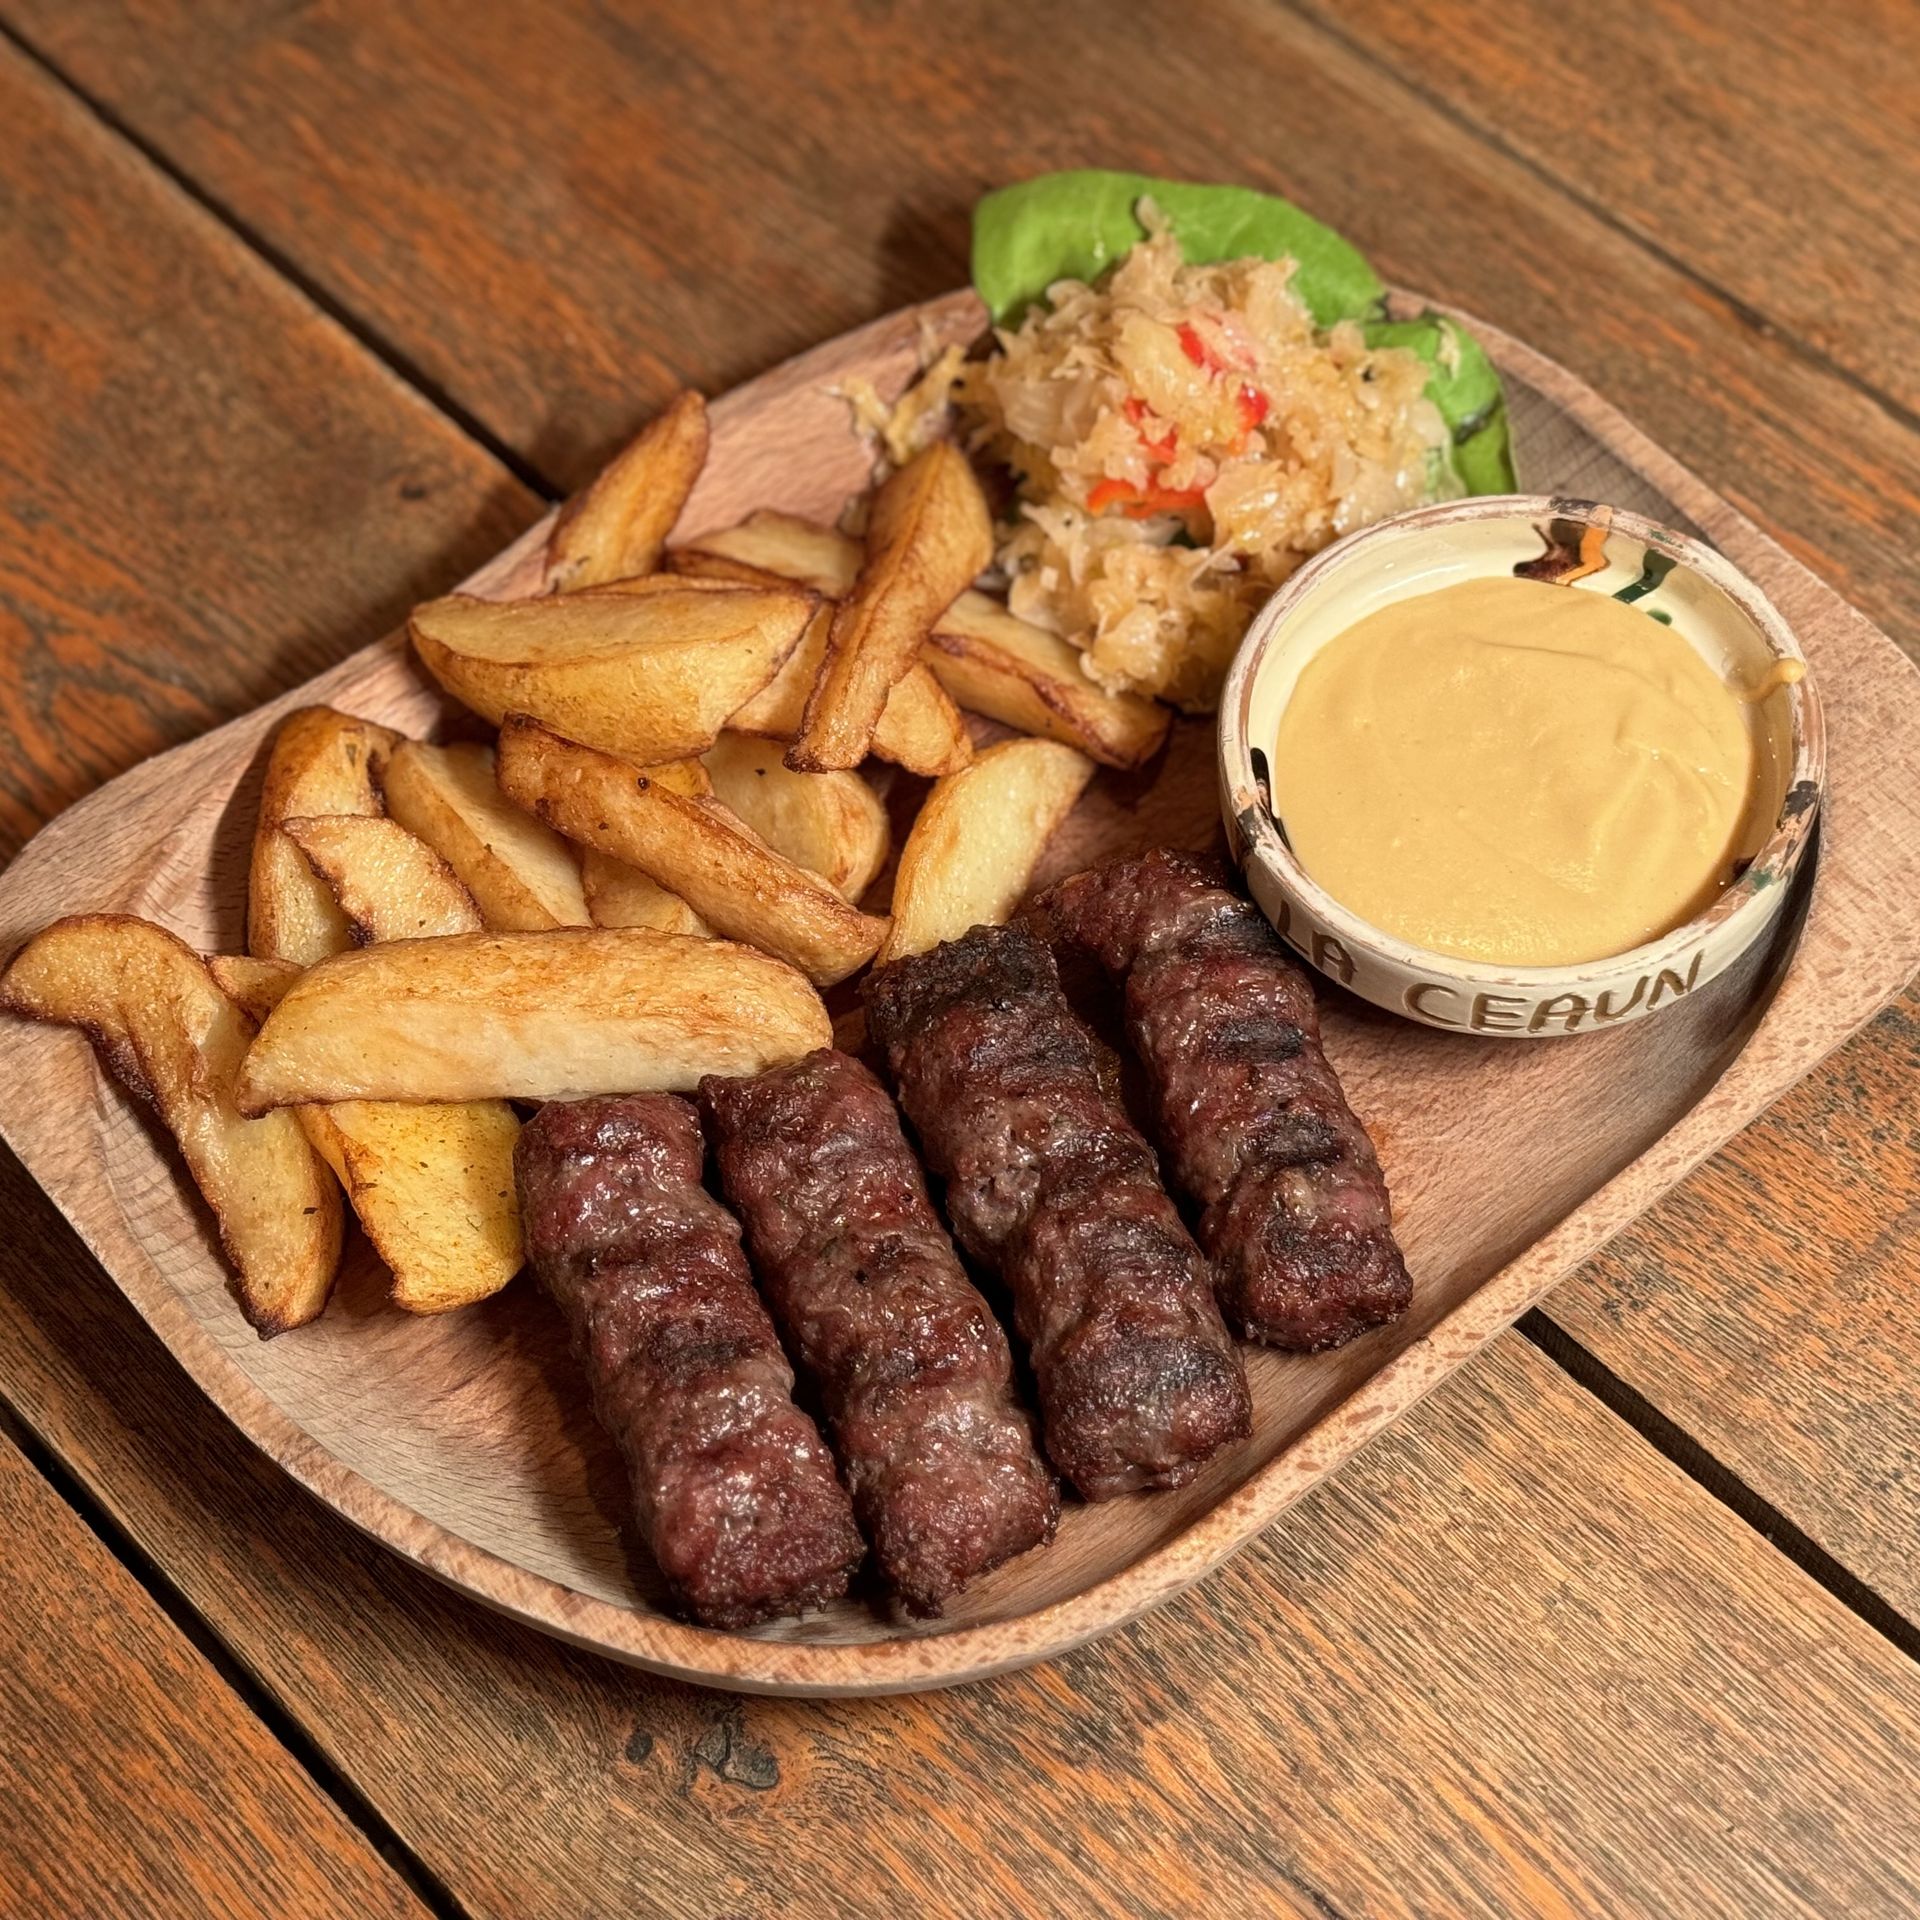 MICI (Griled minced meat), chips and mustard - 650 g